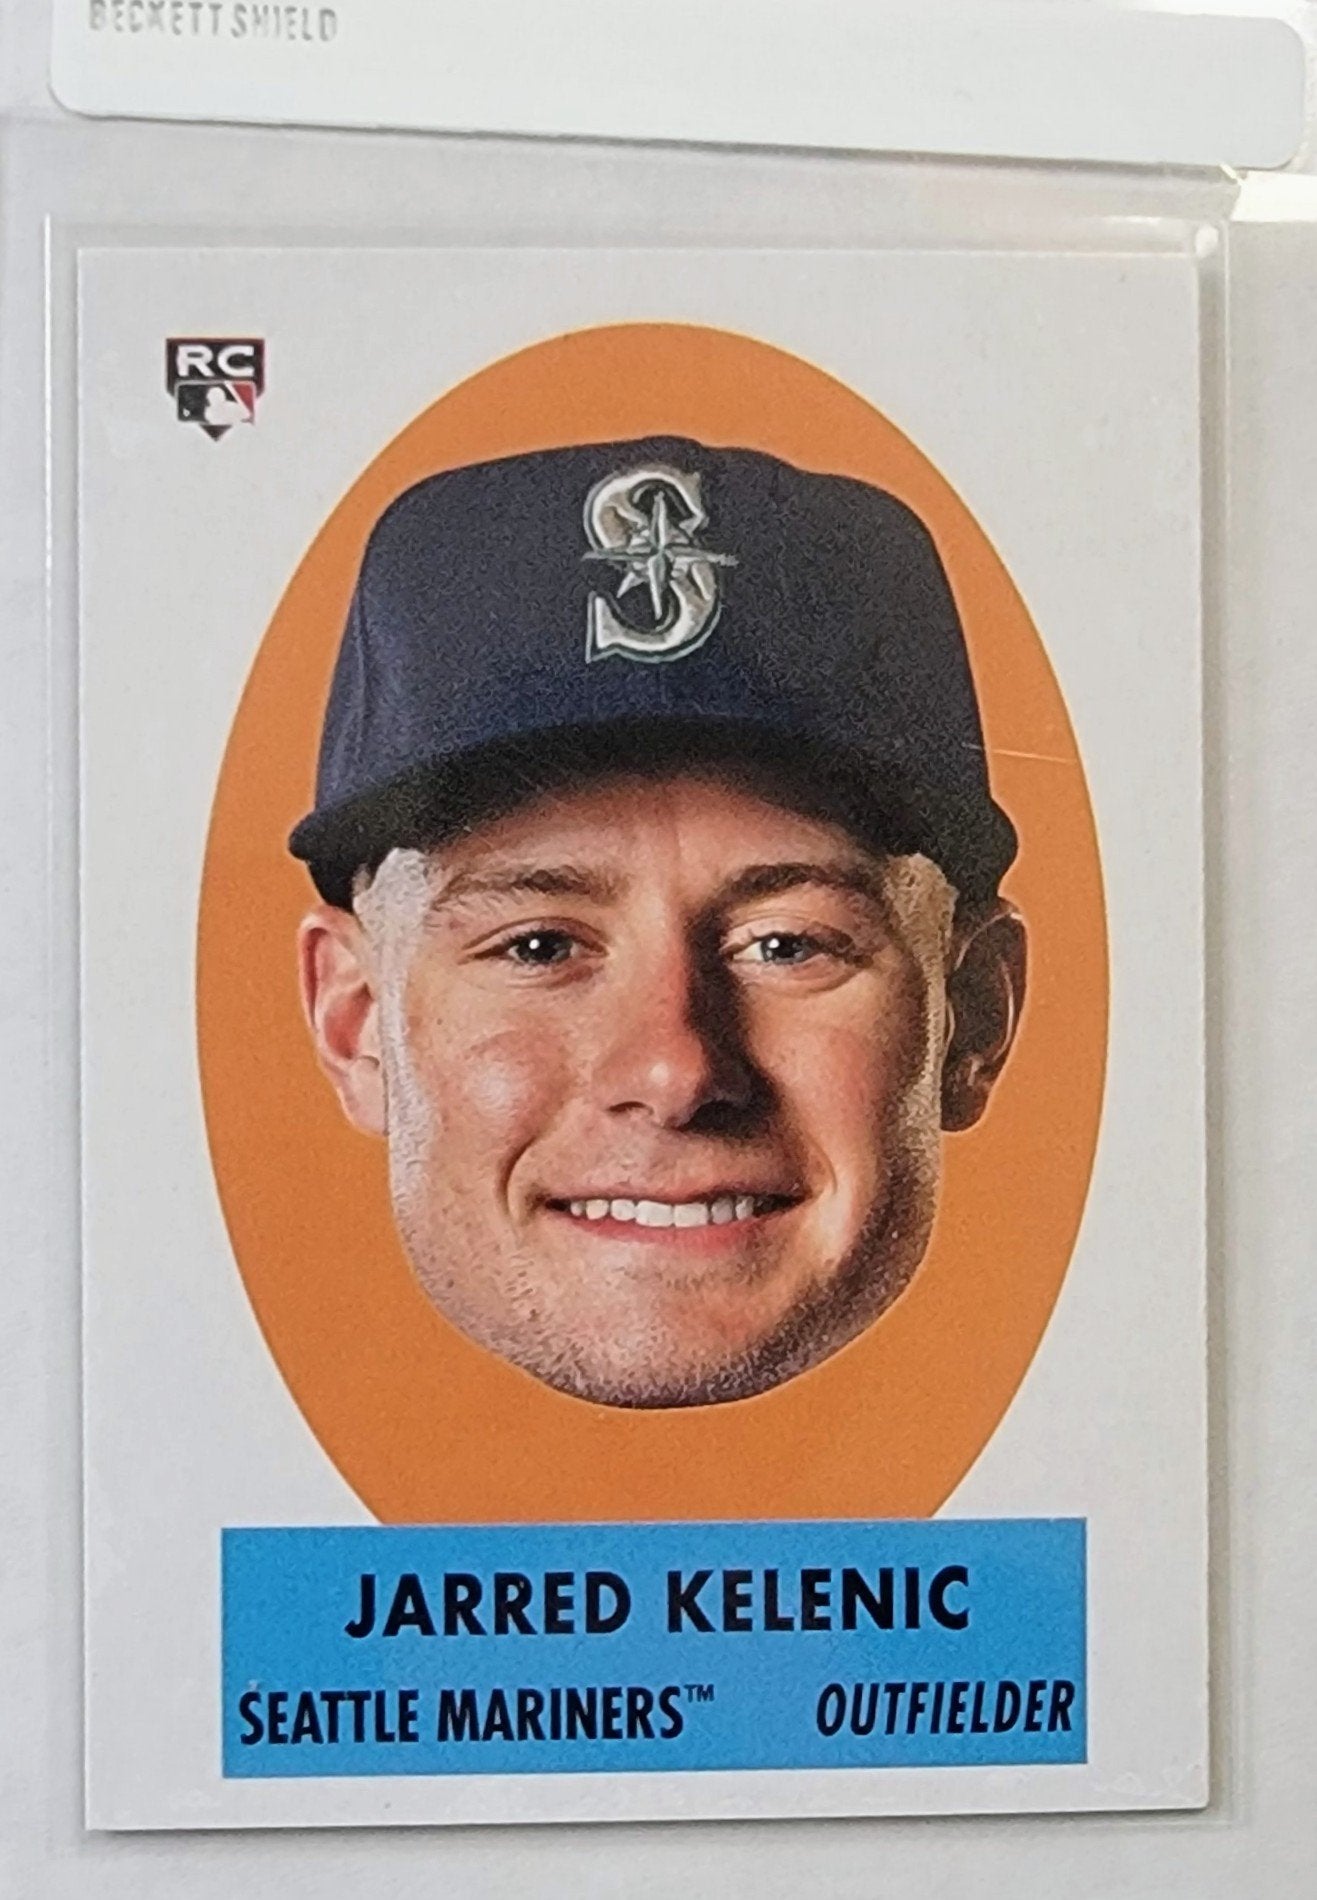 2021 Topps Heritage Jarred Kelenic Portrait Rookie Baseball Card simple Xclusive Collectibles   